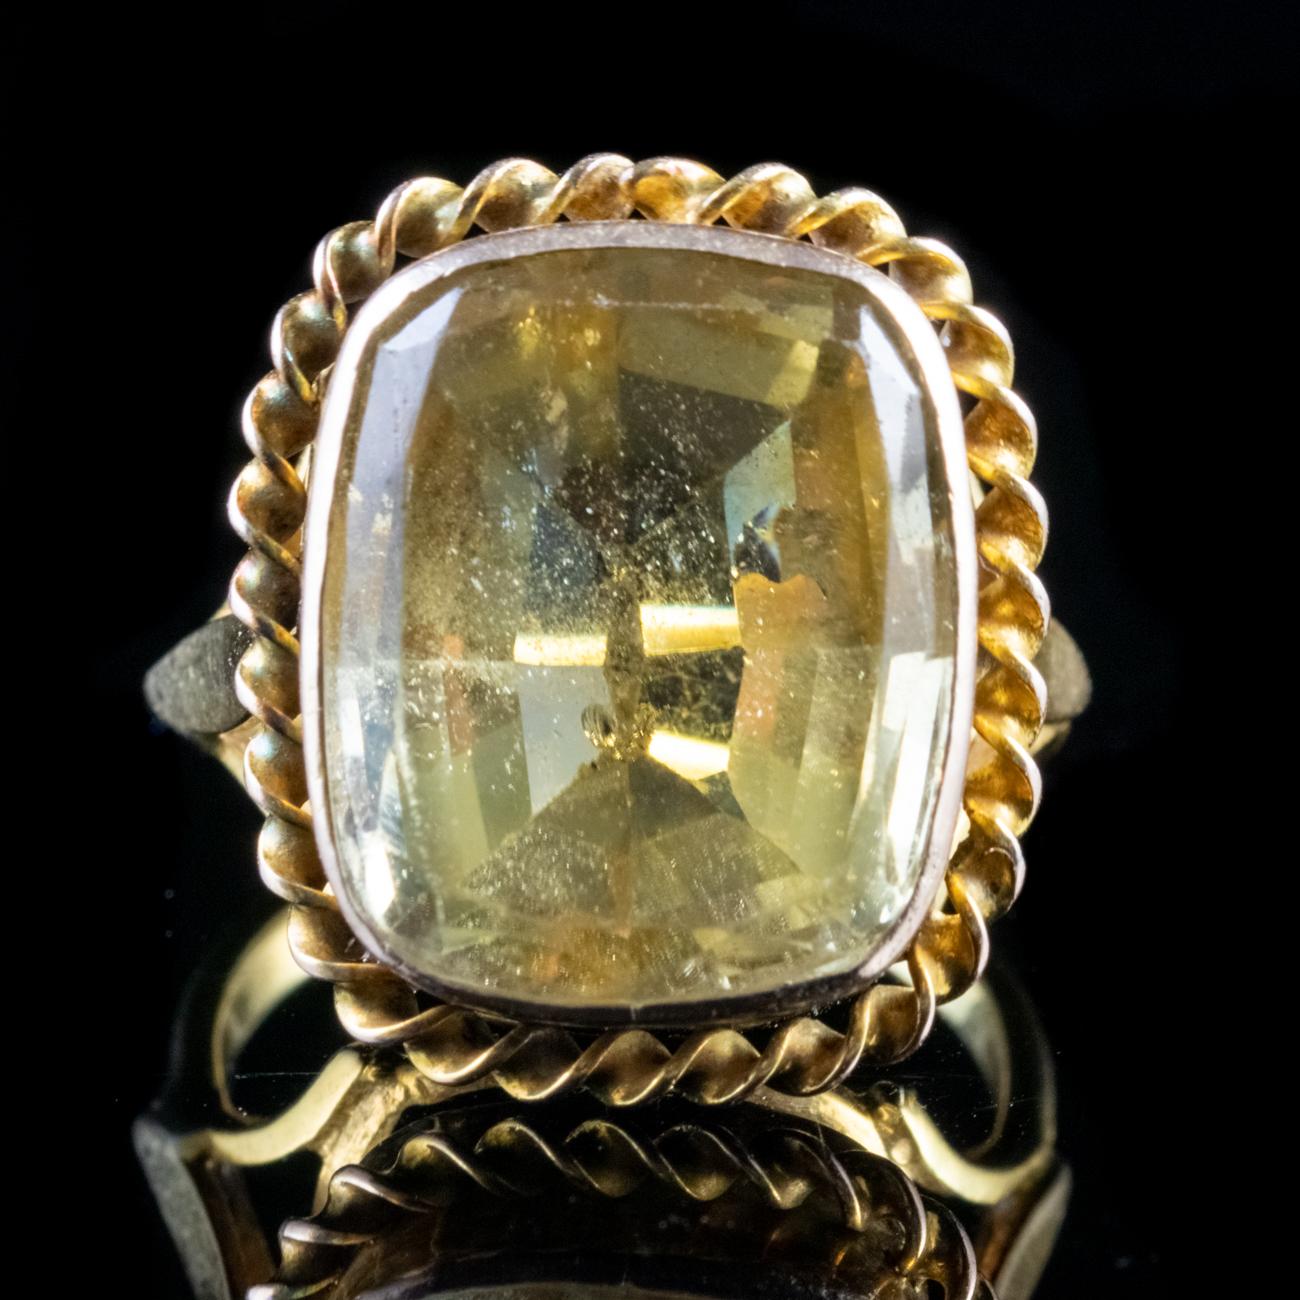 This fabulous Antique Victorian ring is modelled in 18ct Yellow Gold and boasts a magnificent 12ct Natural Citrine. The Citrine is set in an ornate gallery with a lovely rope edge, which sits proudly off the finger.

Citrines sparkle with a crisp